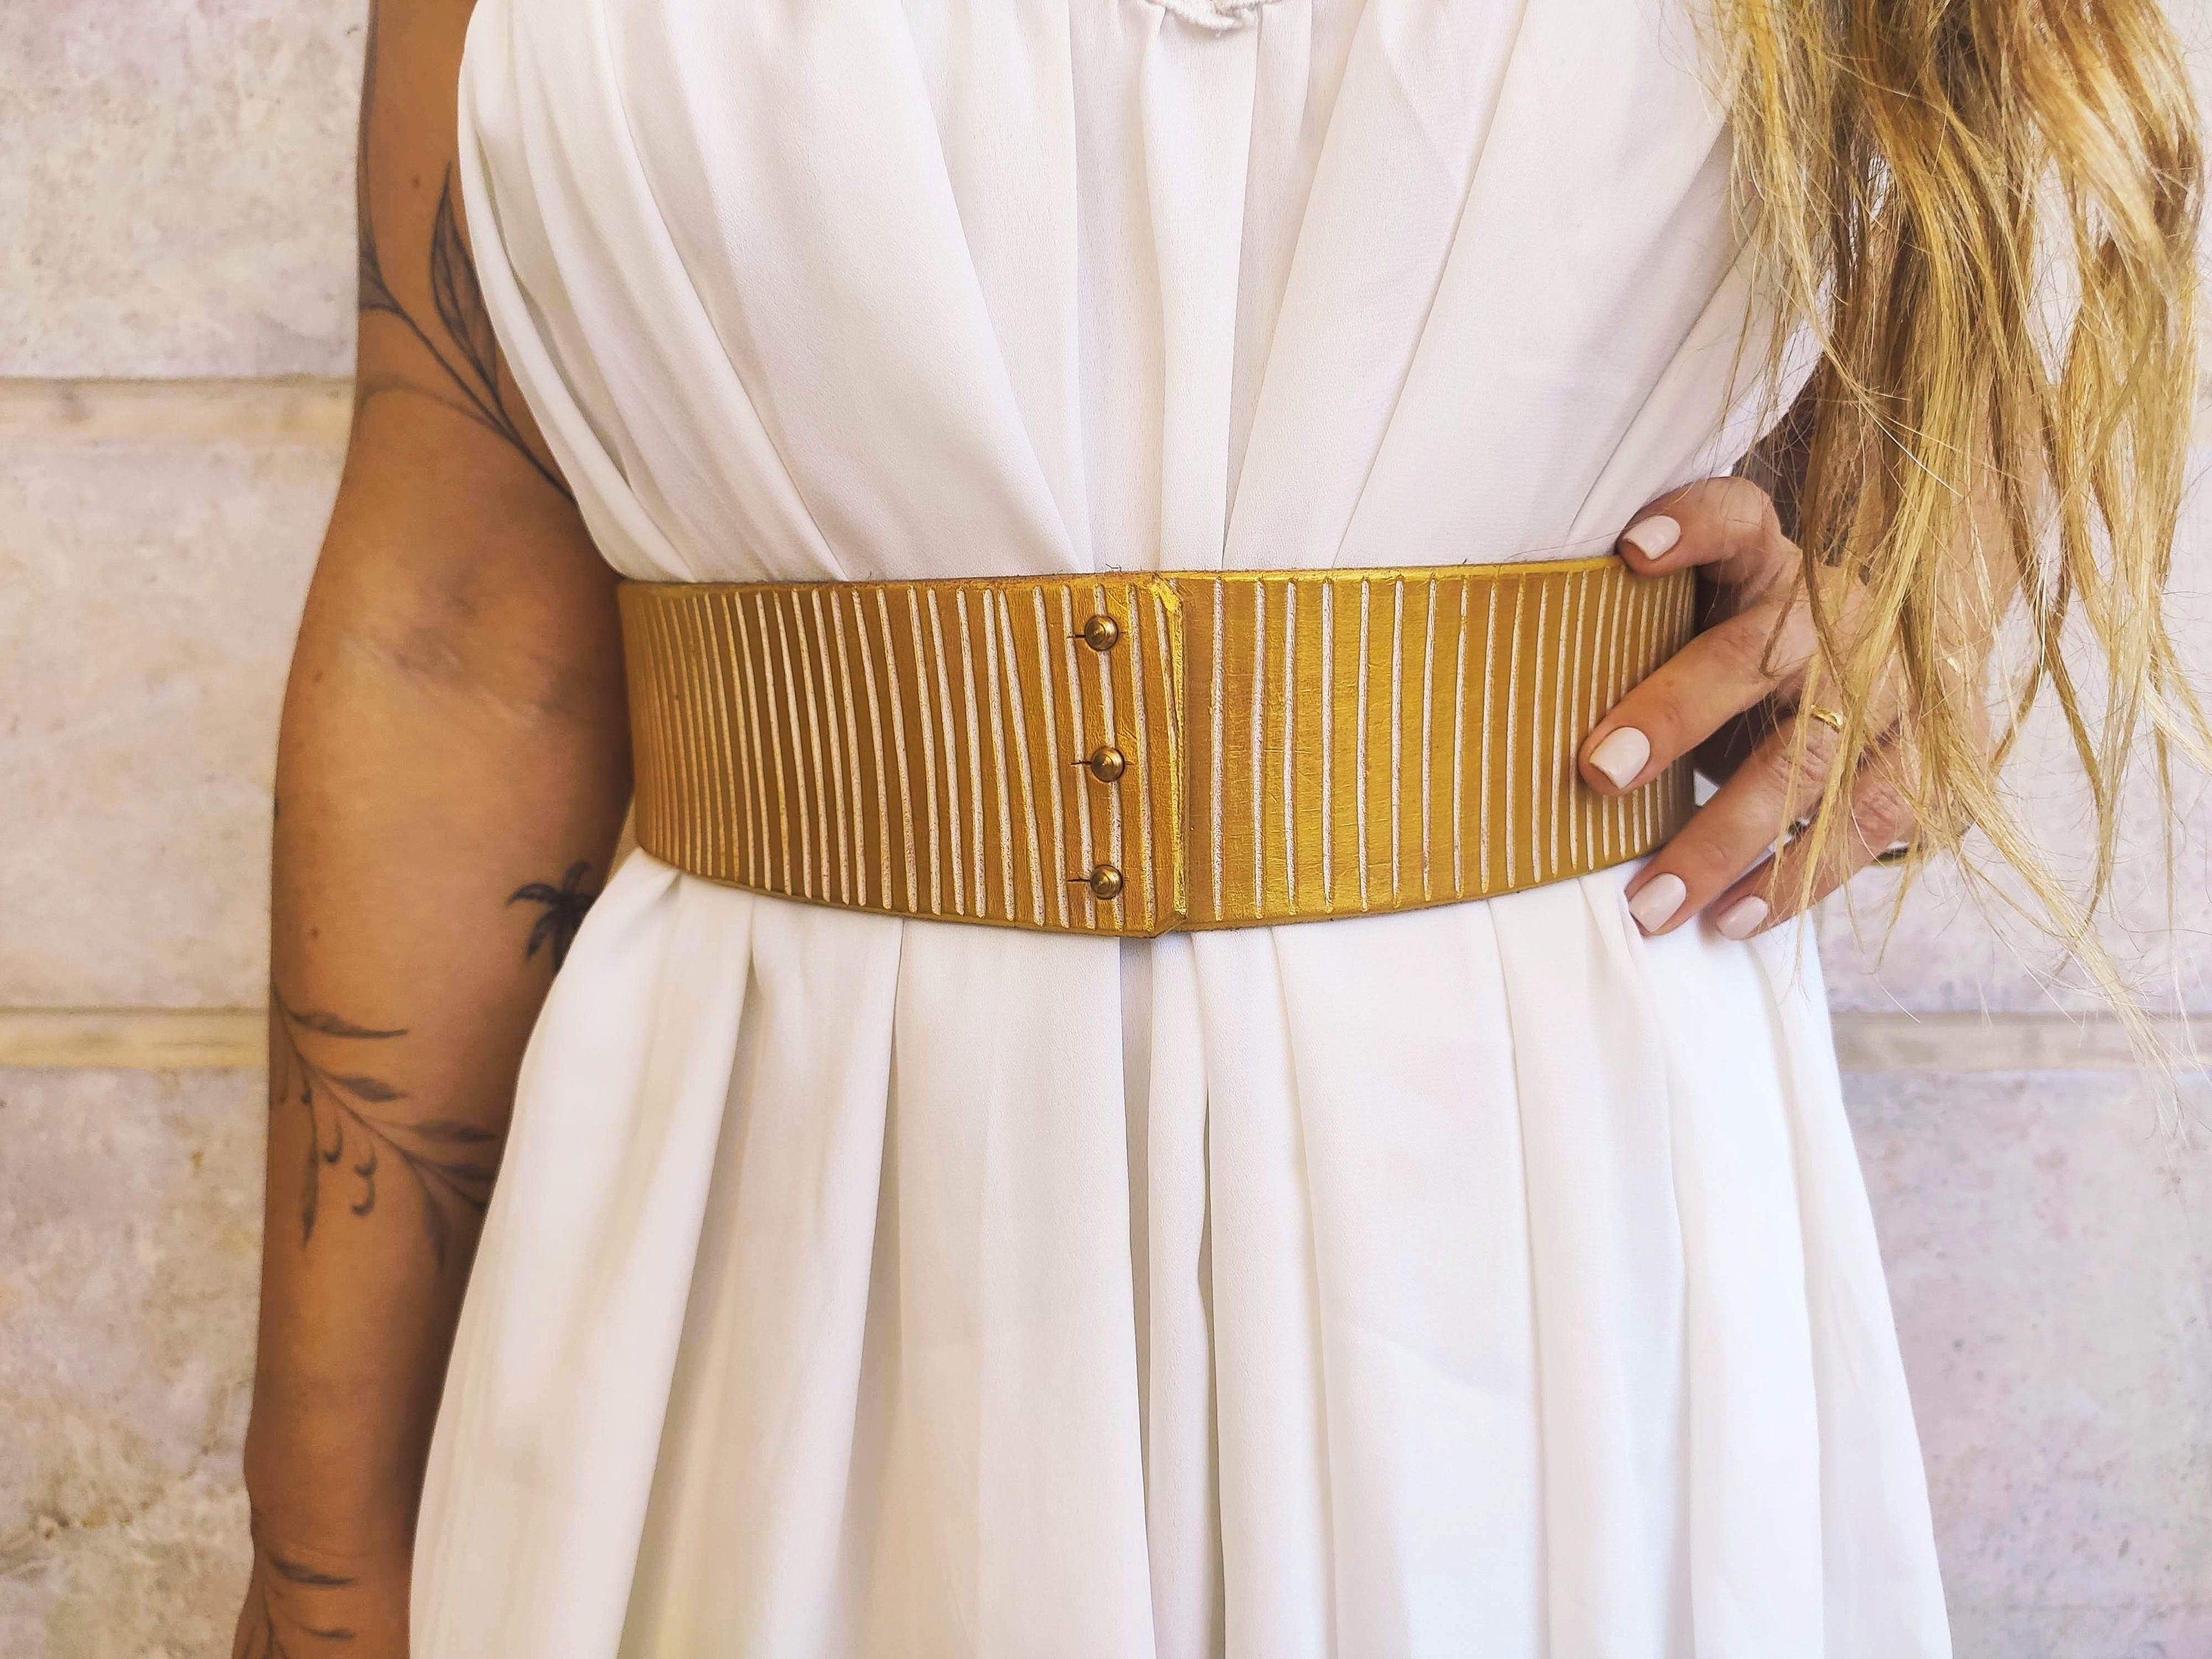 Bridal Belts, white & gold leather belt for wedding dress made by